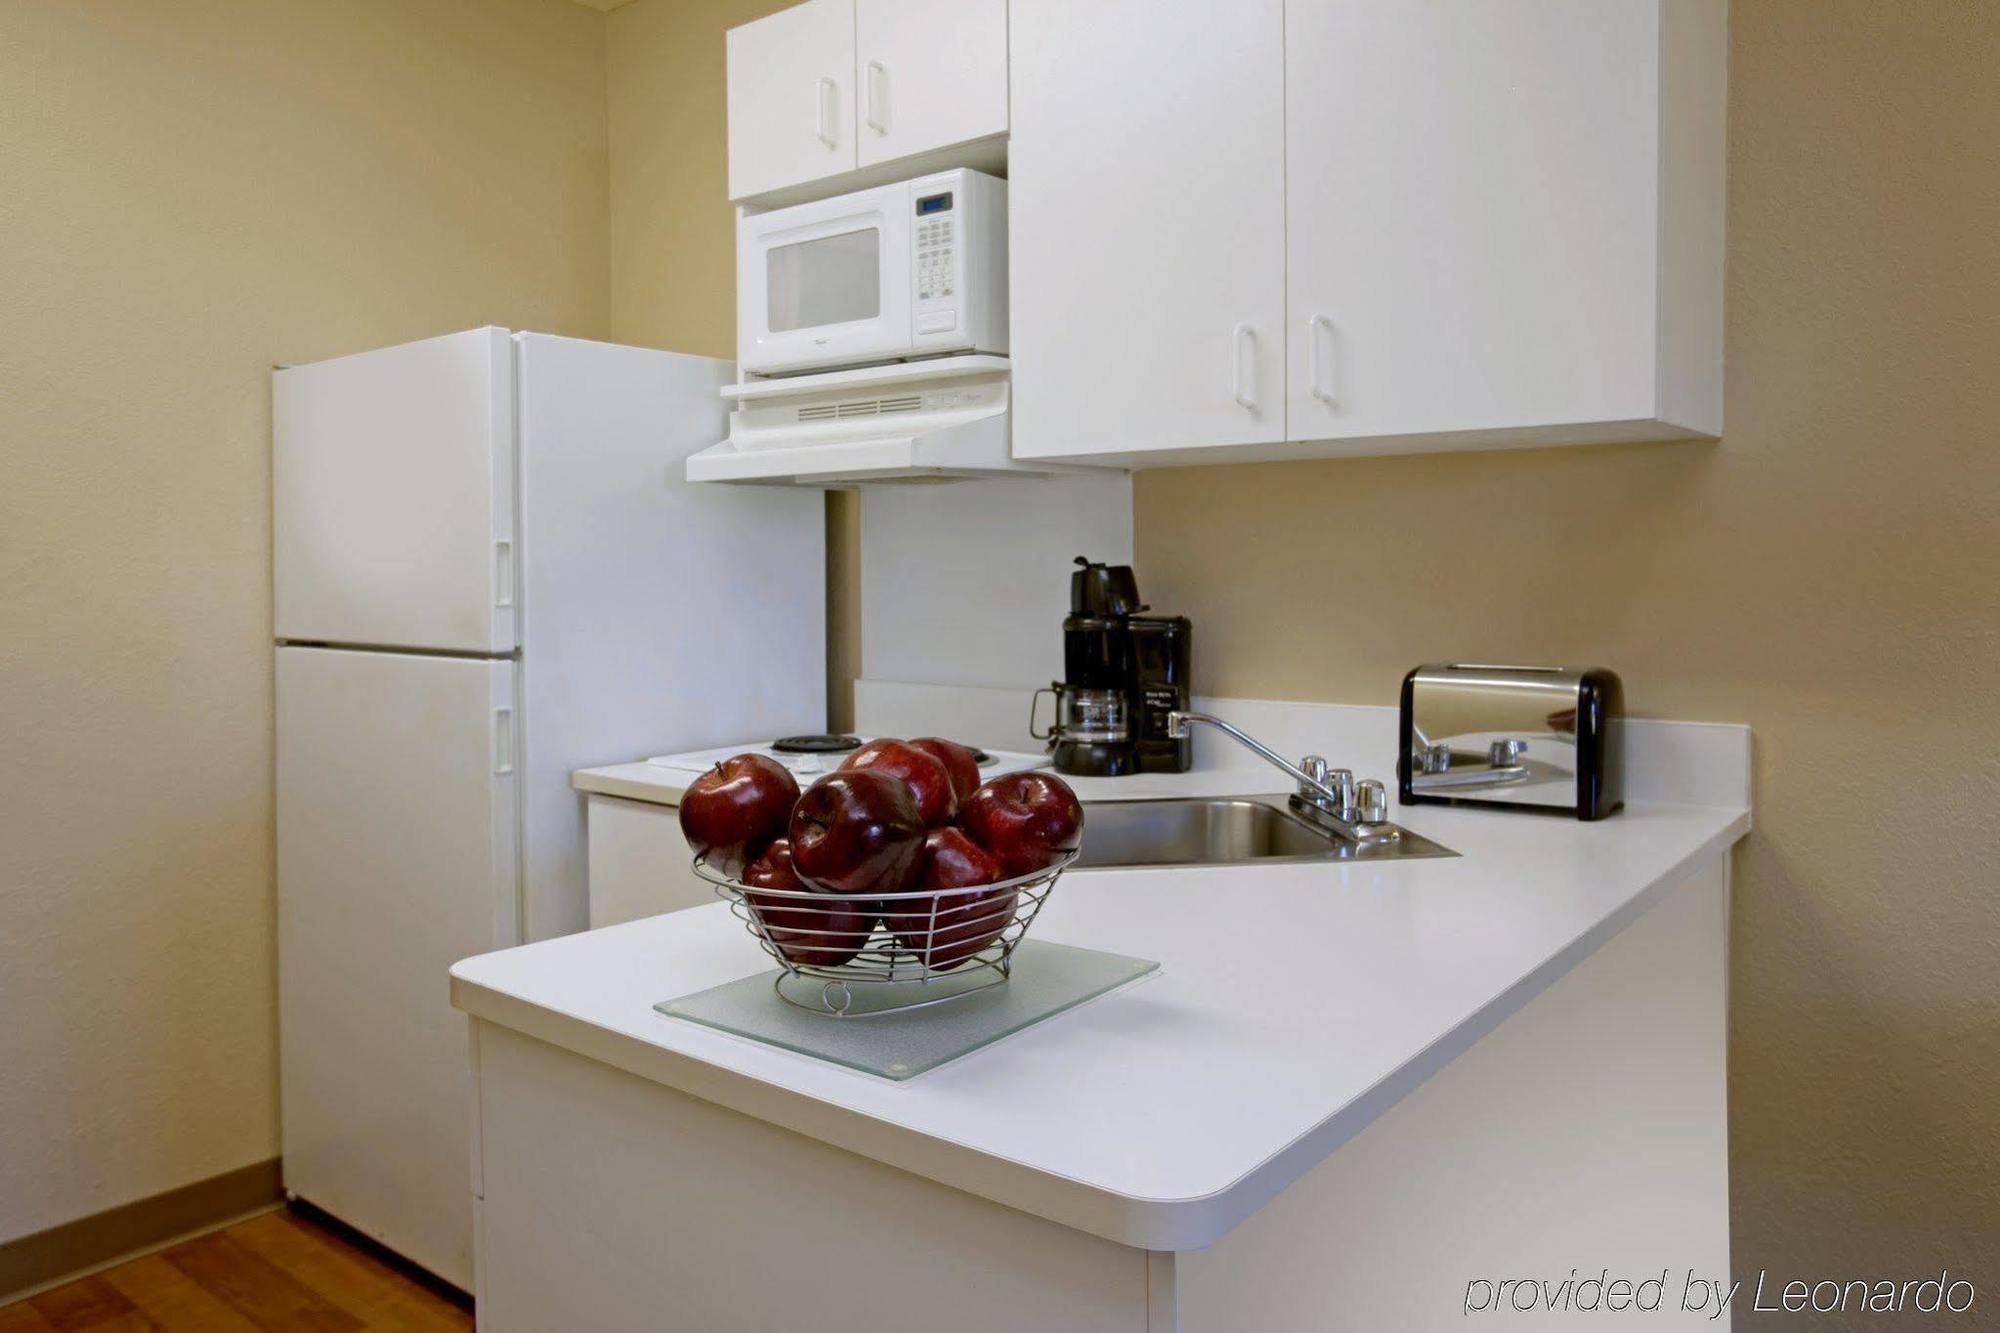 Extended Stay America Suites - Champaign - Urbana Kamer foto